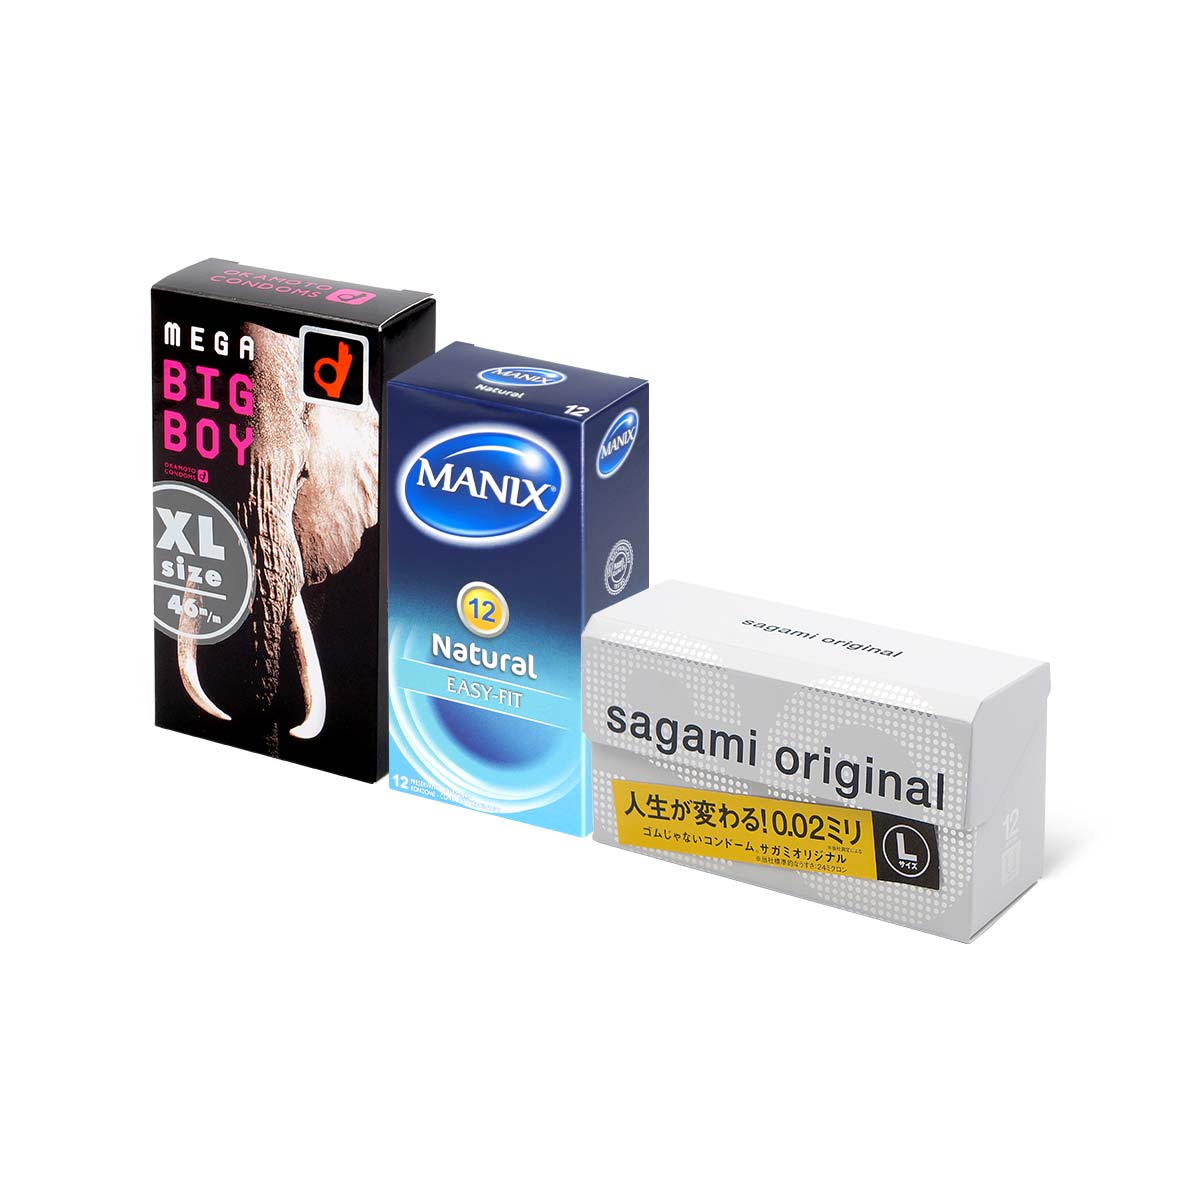 Sampson Recommended Large Size Combo Pack 36 pieces condom-p_1